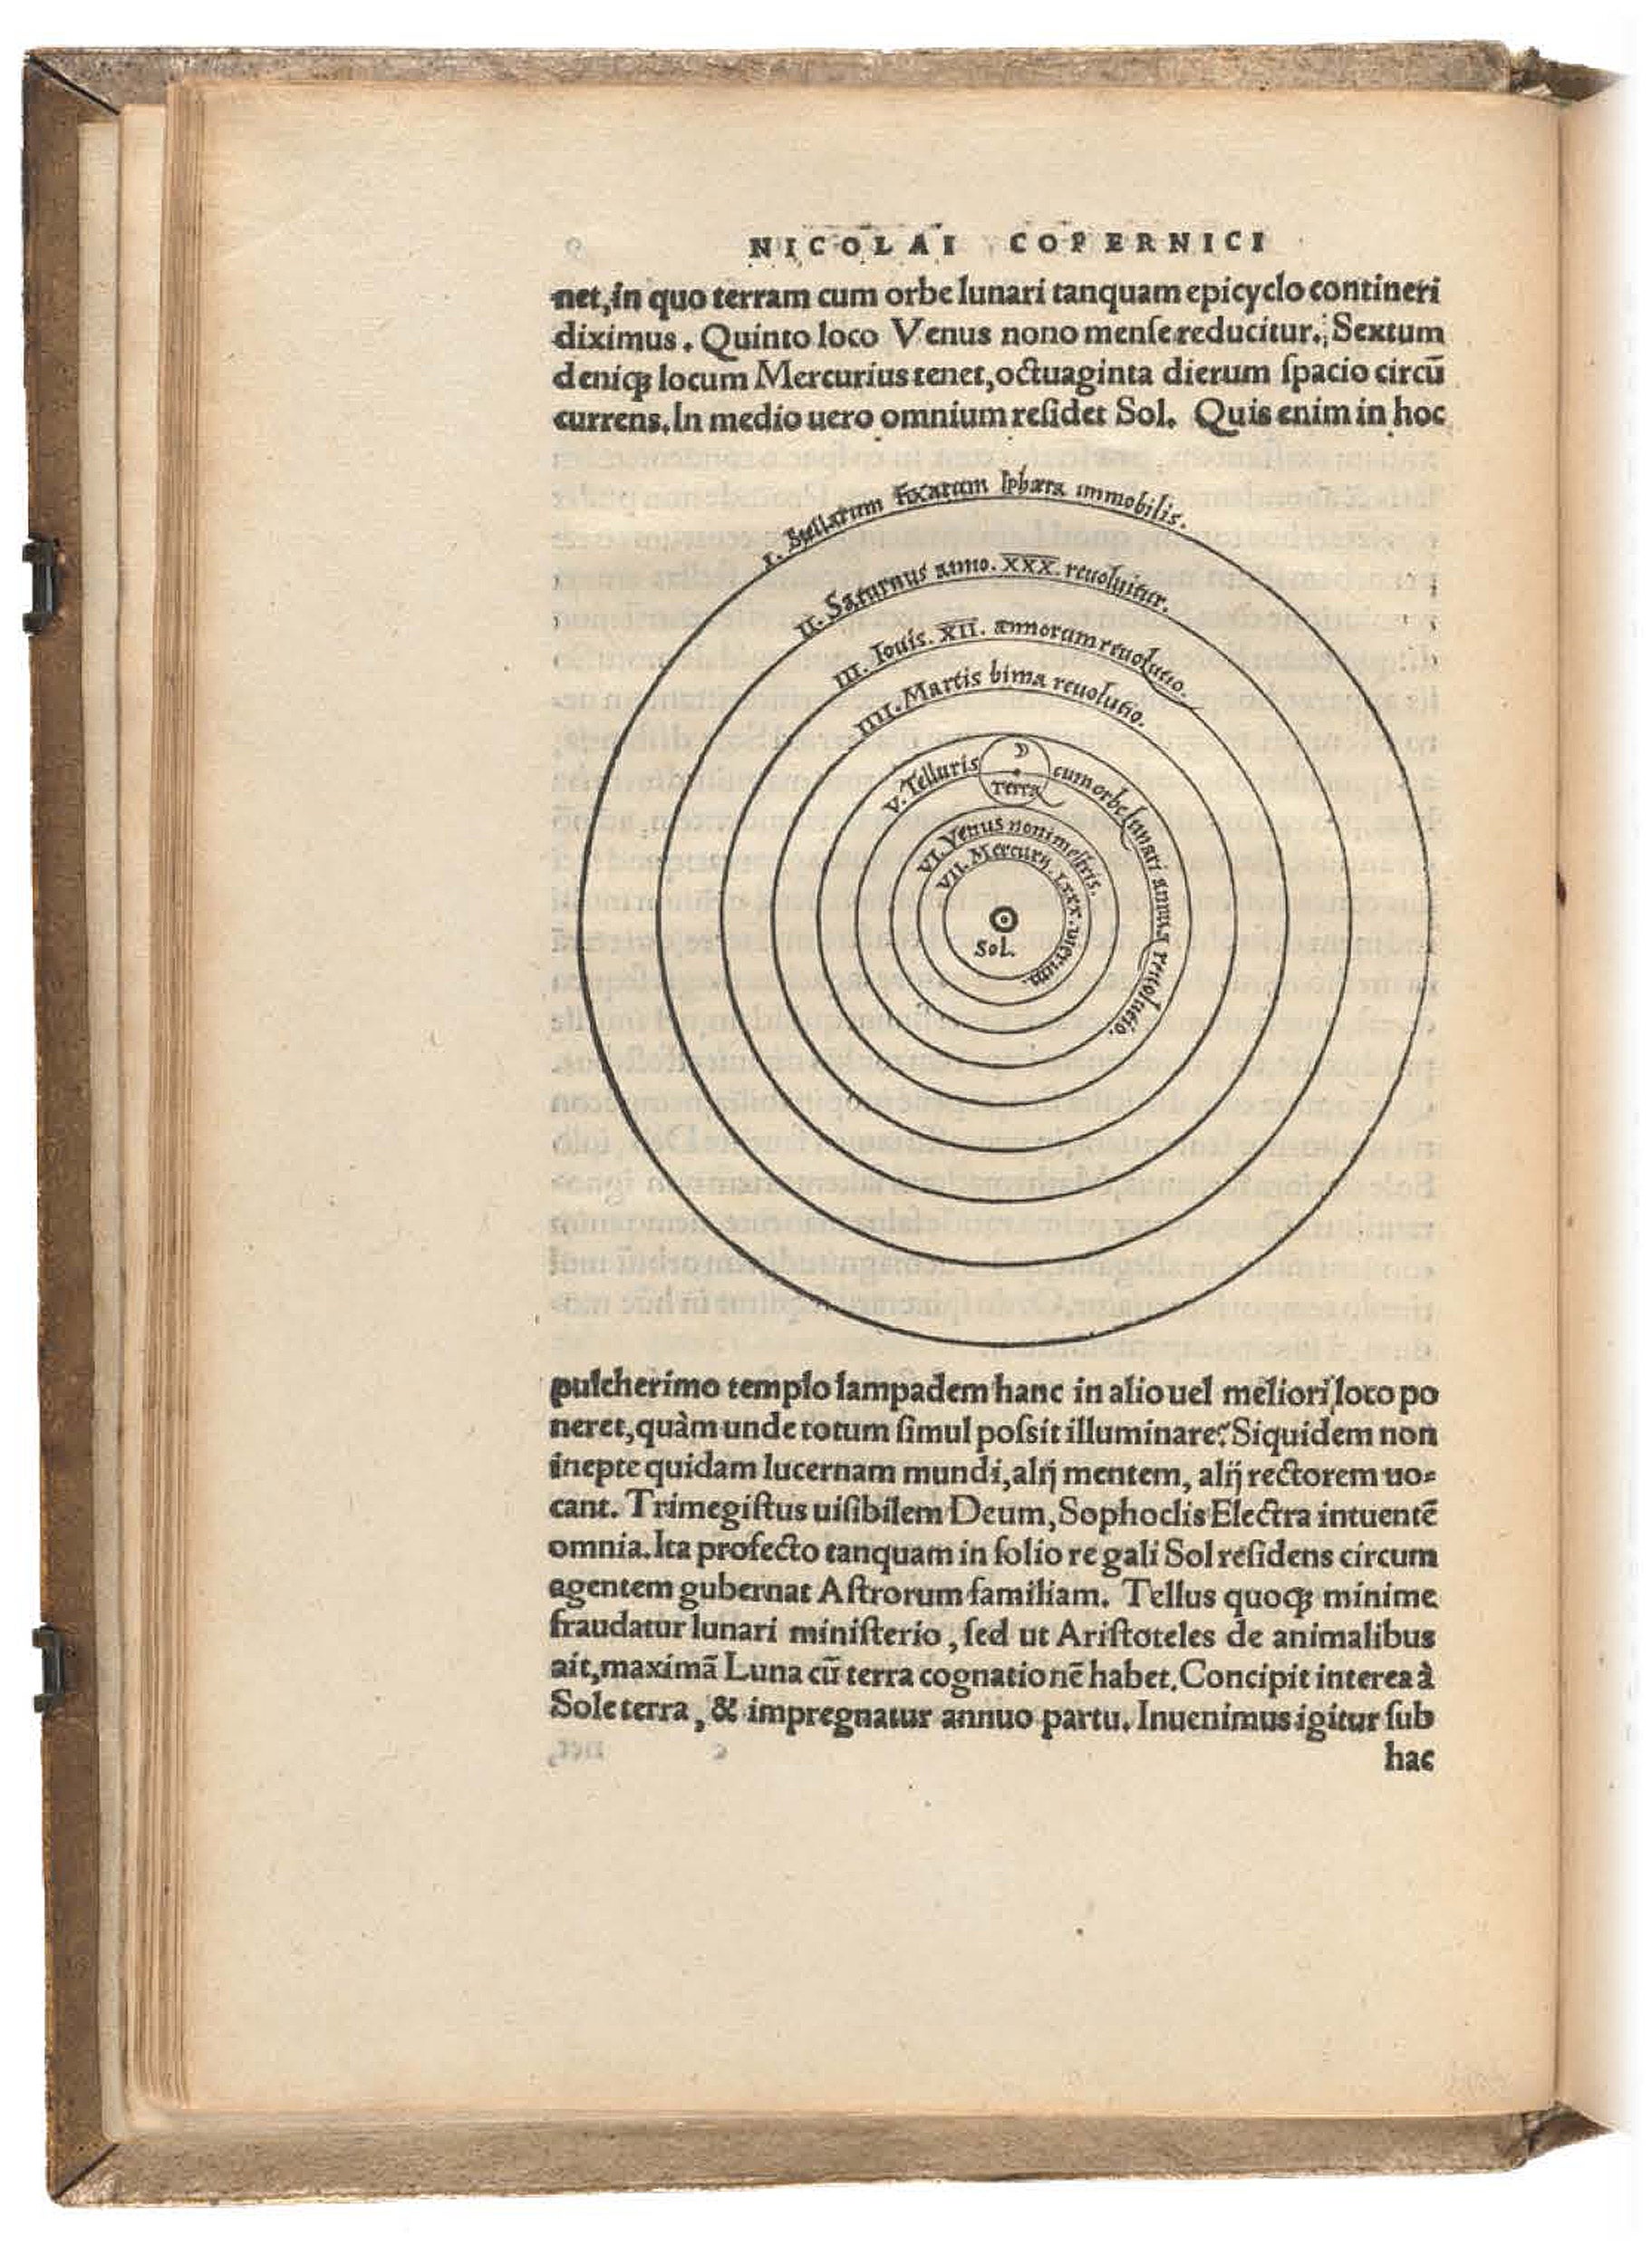 Diagram from Nicolaus Copernicus places the sun at the center of the solar system.